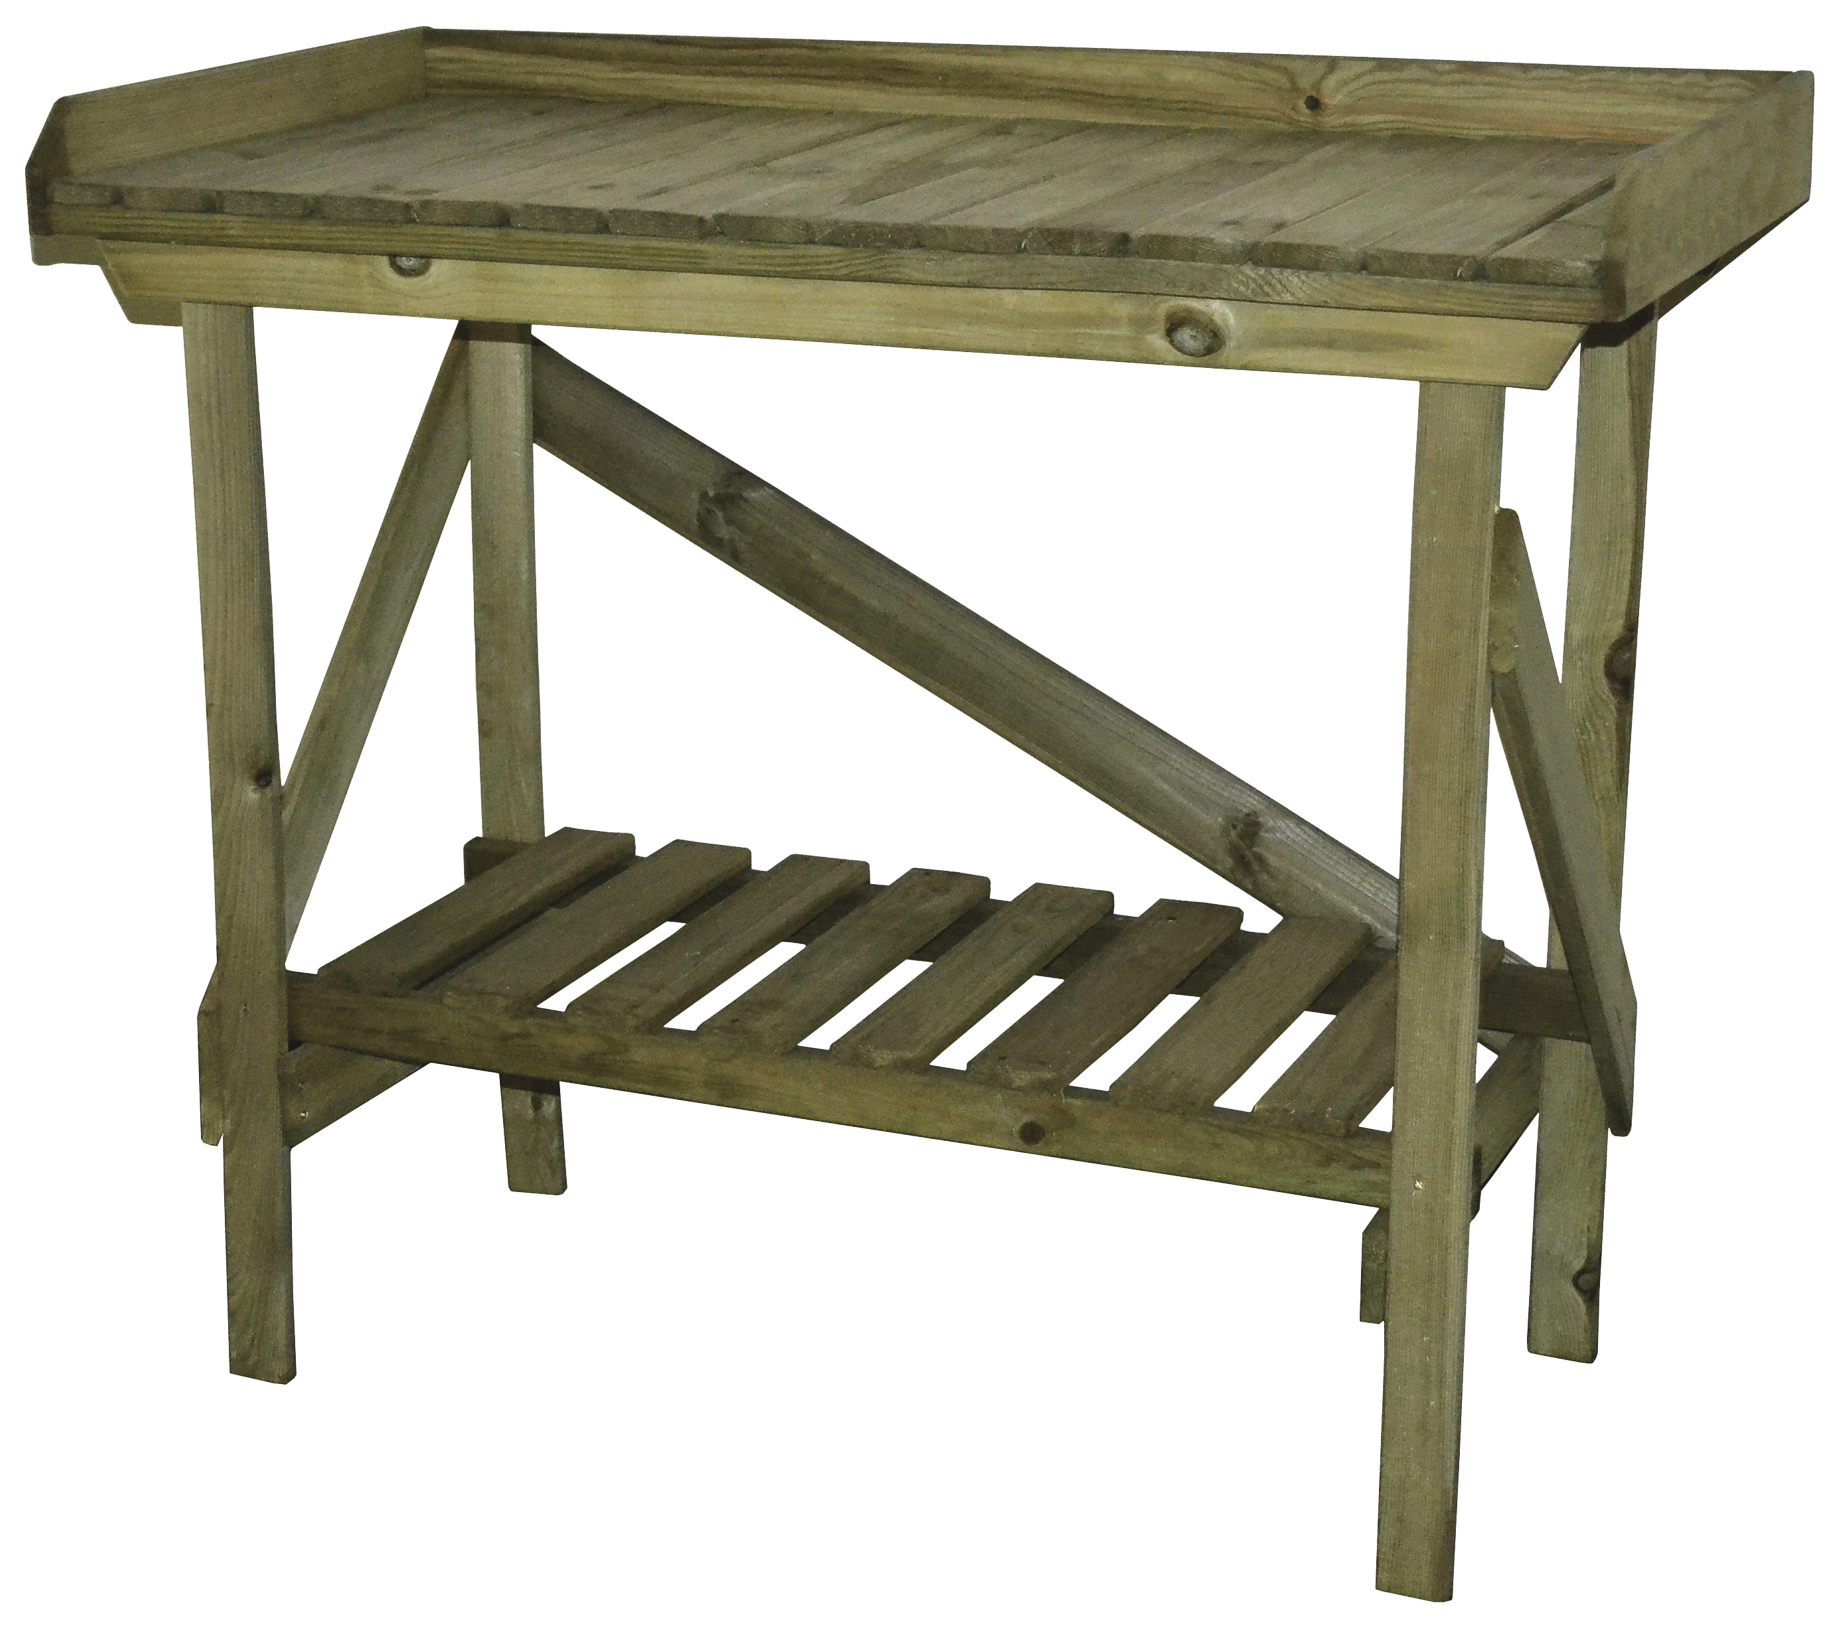 Image of Forest Garden Potting Bench - 920 x 1075 x 515mm